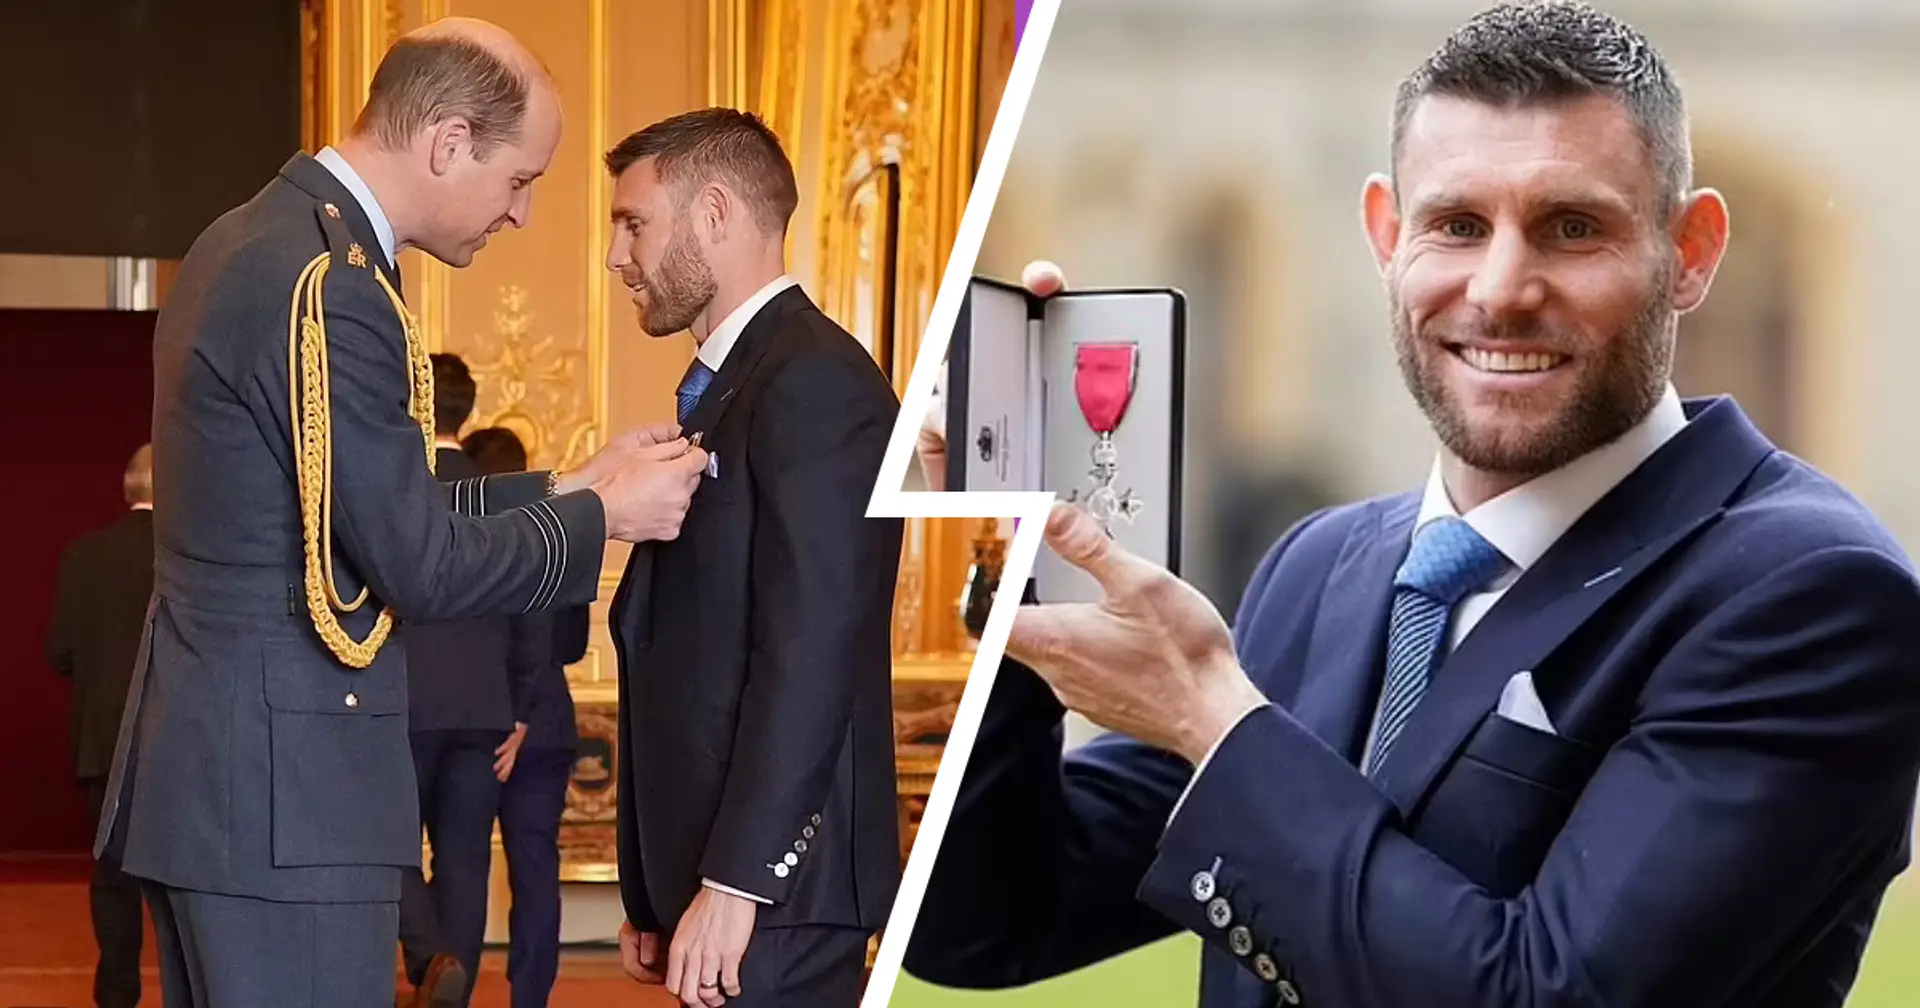 OFFICIAL: James Milner awarded MBE for his service to football and charity